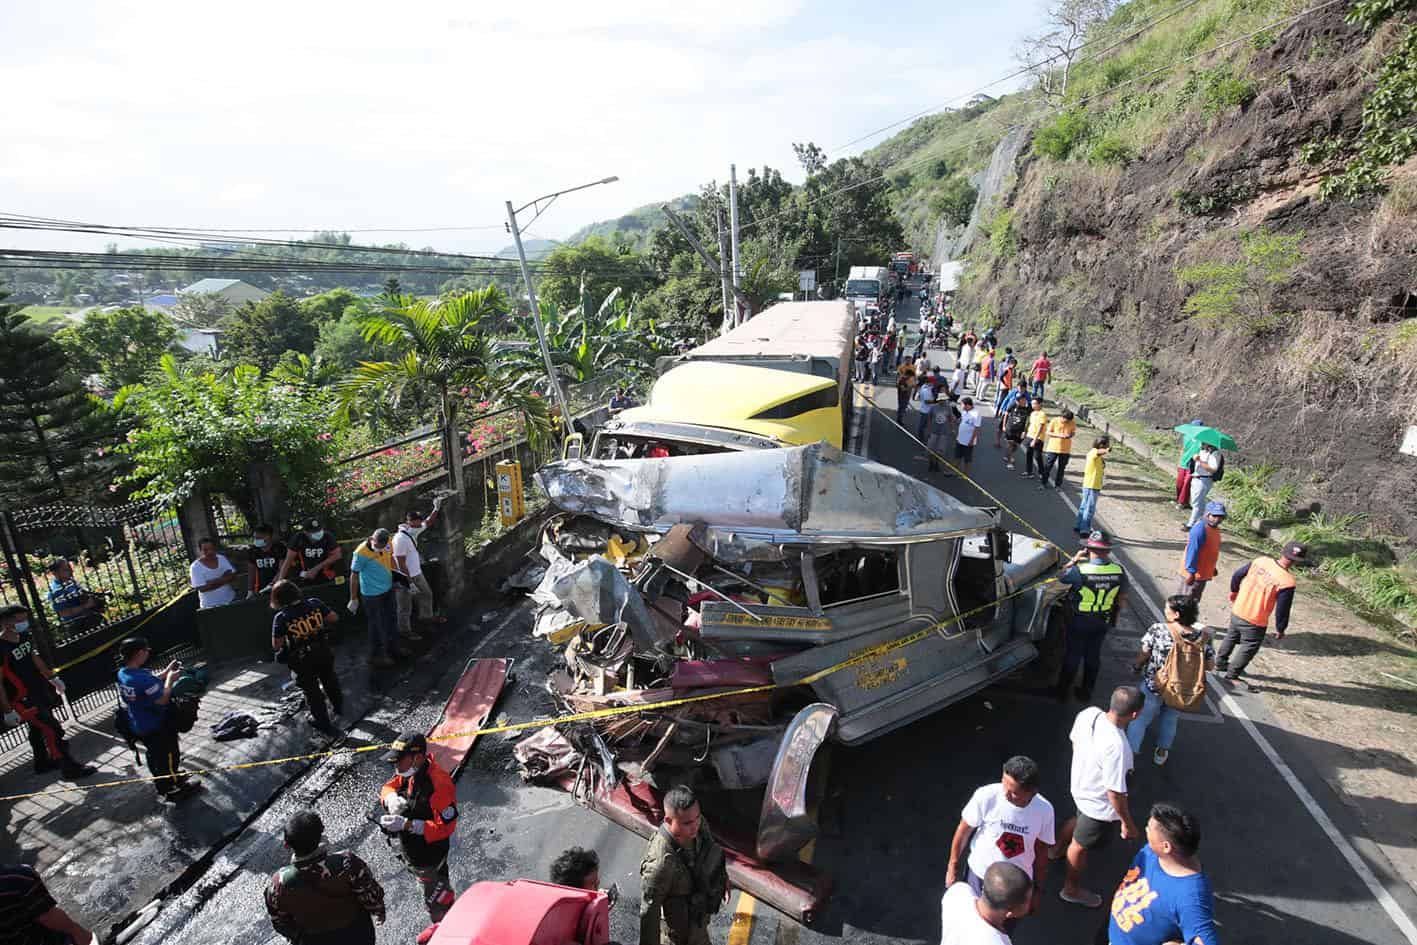 Two Dead, 14 Injured After Jeepney Rear-Ends Dump Truck In Philippines